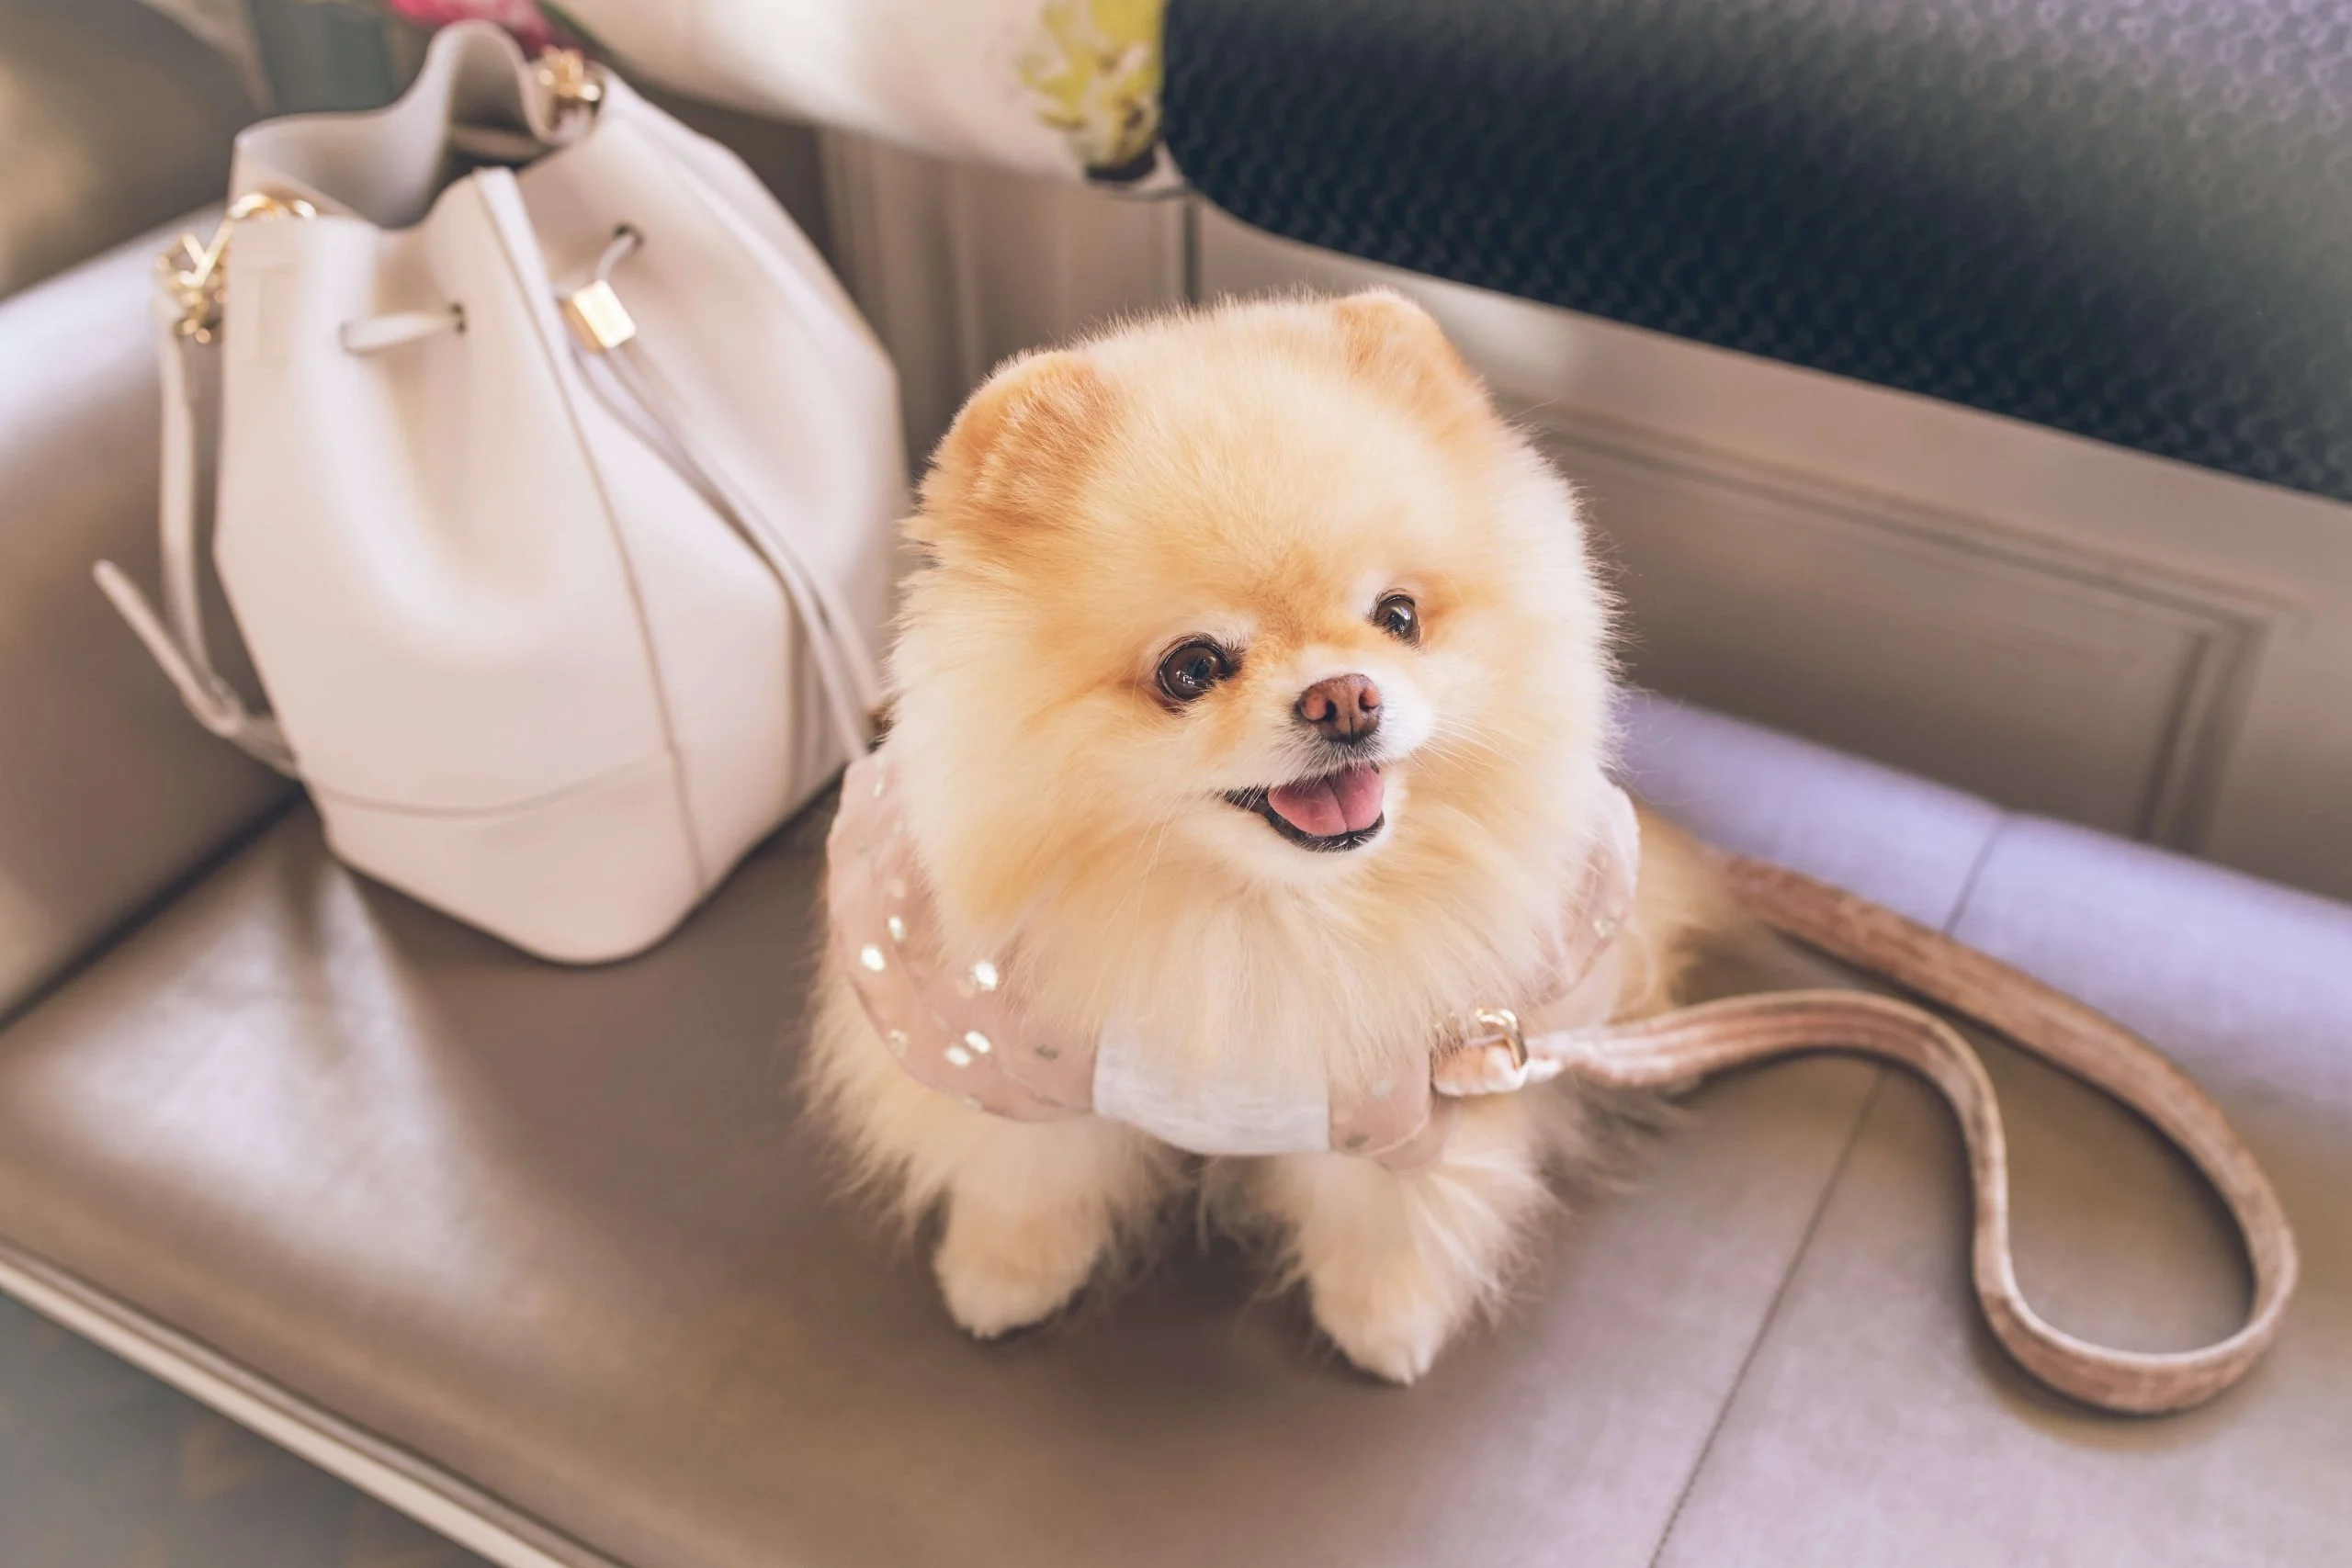  Why might a Pomeranian puppy not be gaining weight? 